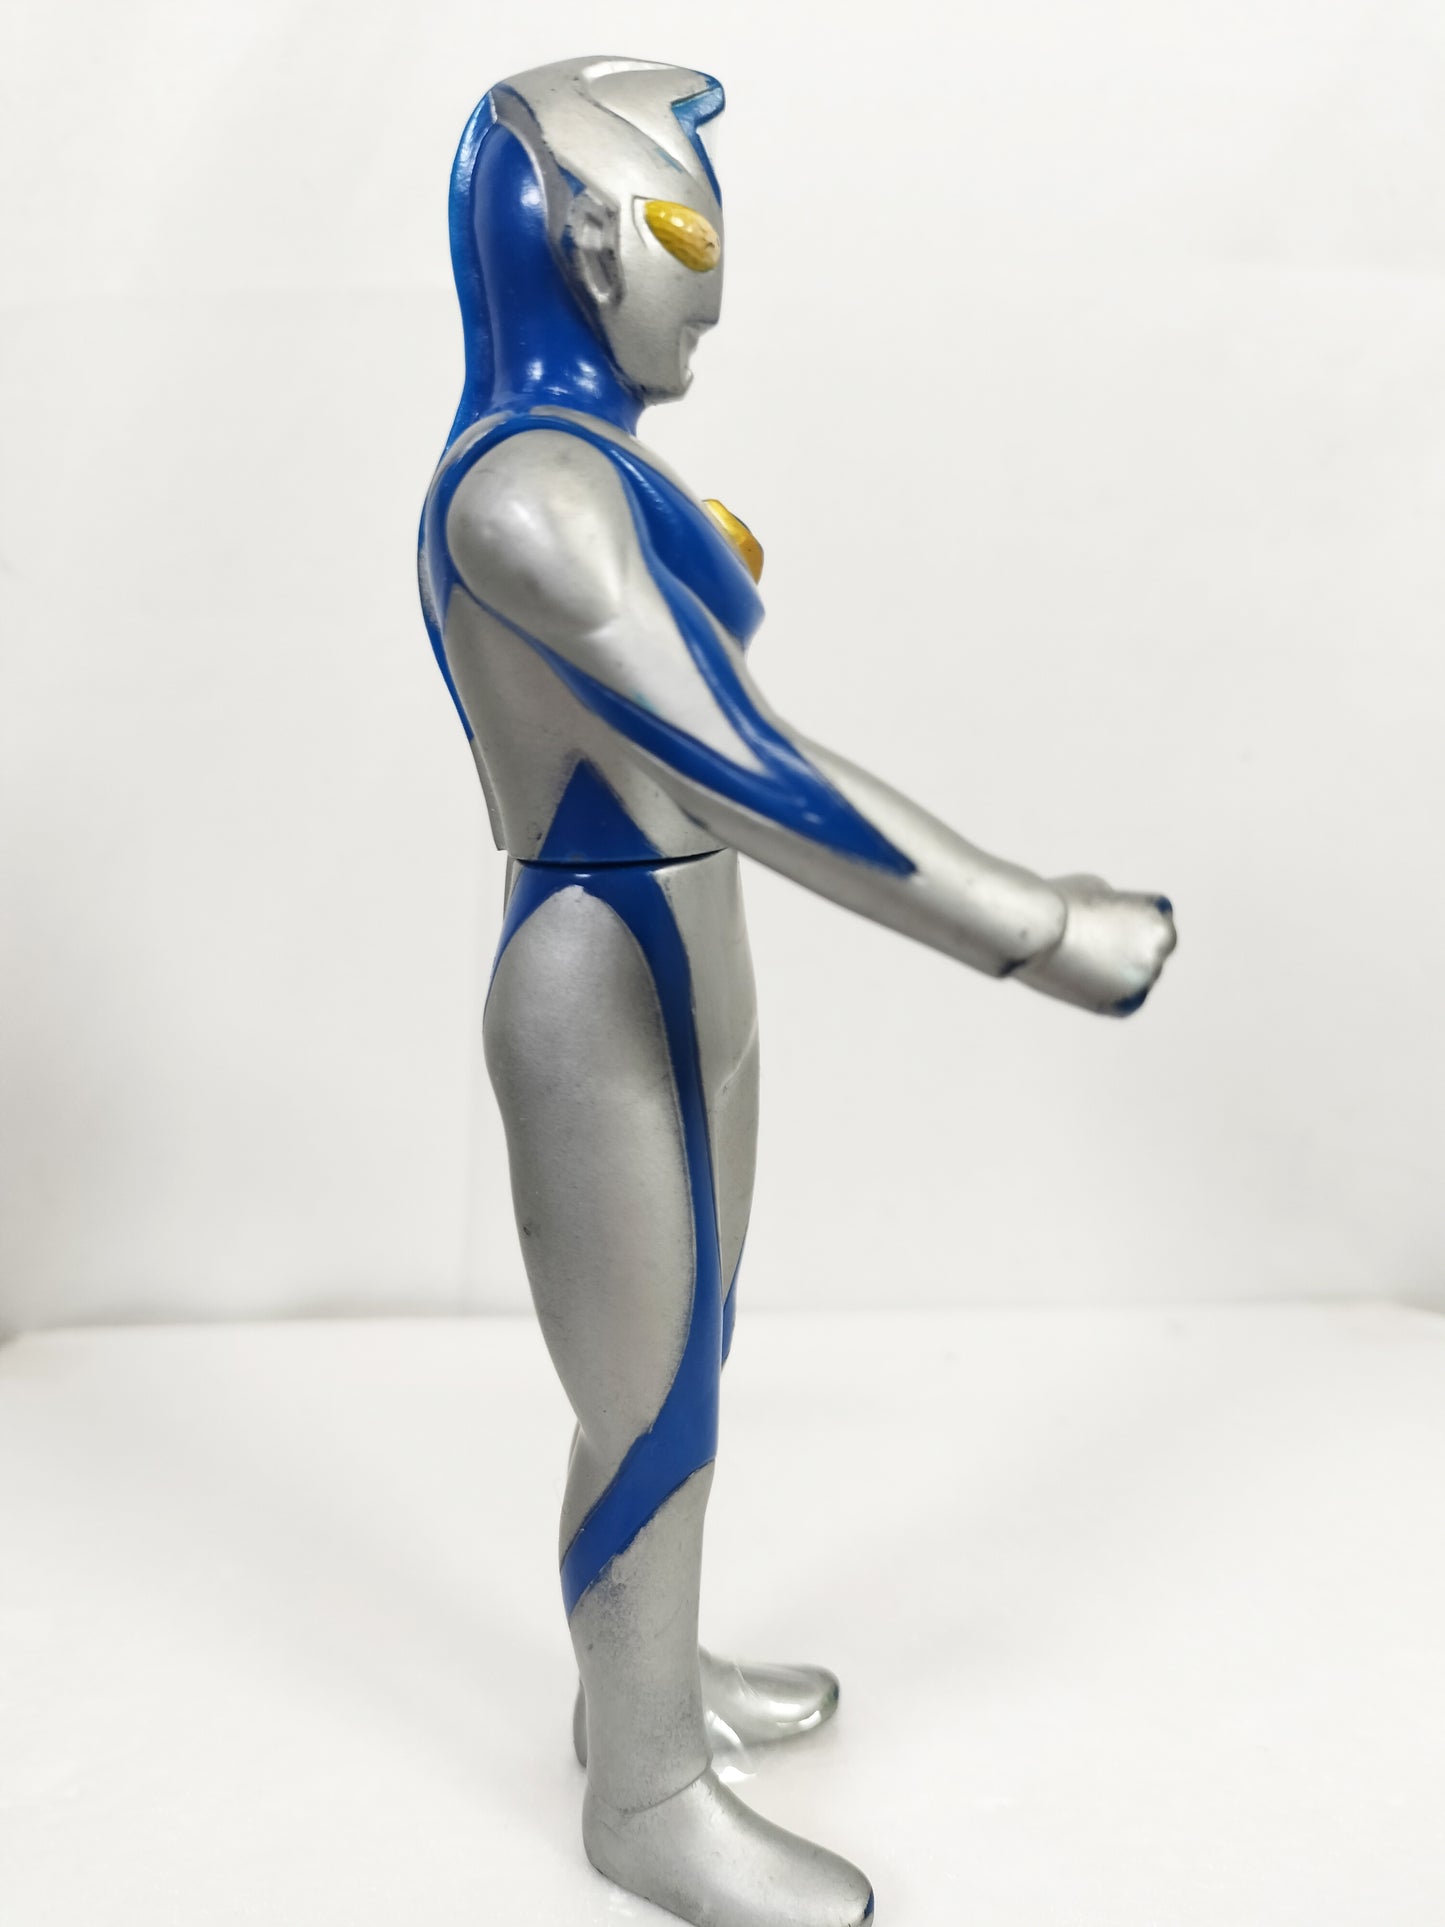 Ultraman Dyna (Miracle type) Made in China Height about 16cm Manufactured in 1997 Sofvi Figure retro vintage major scratches and dirt